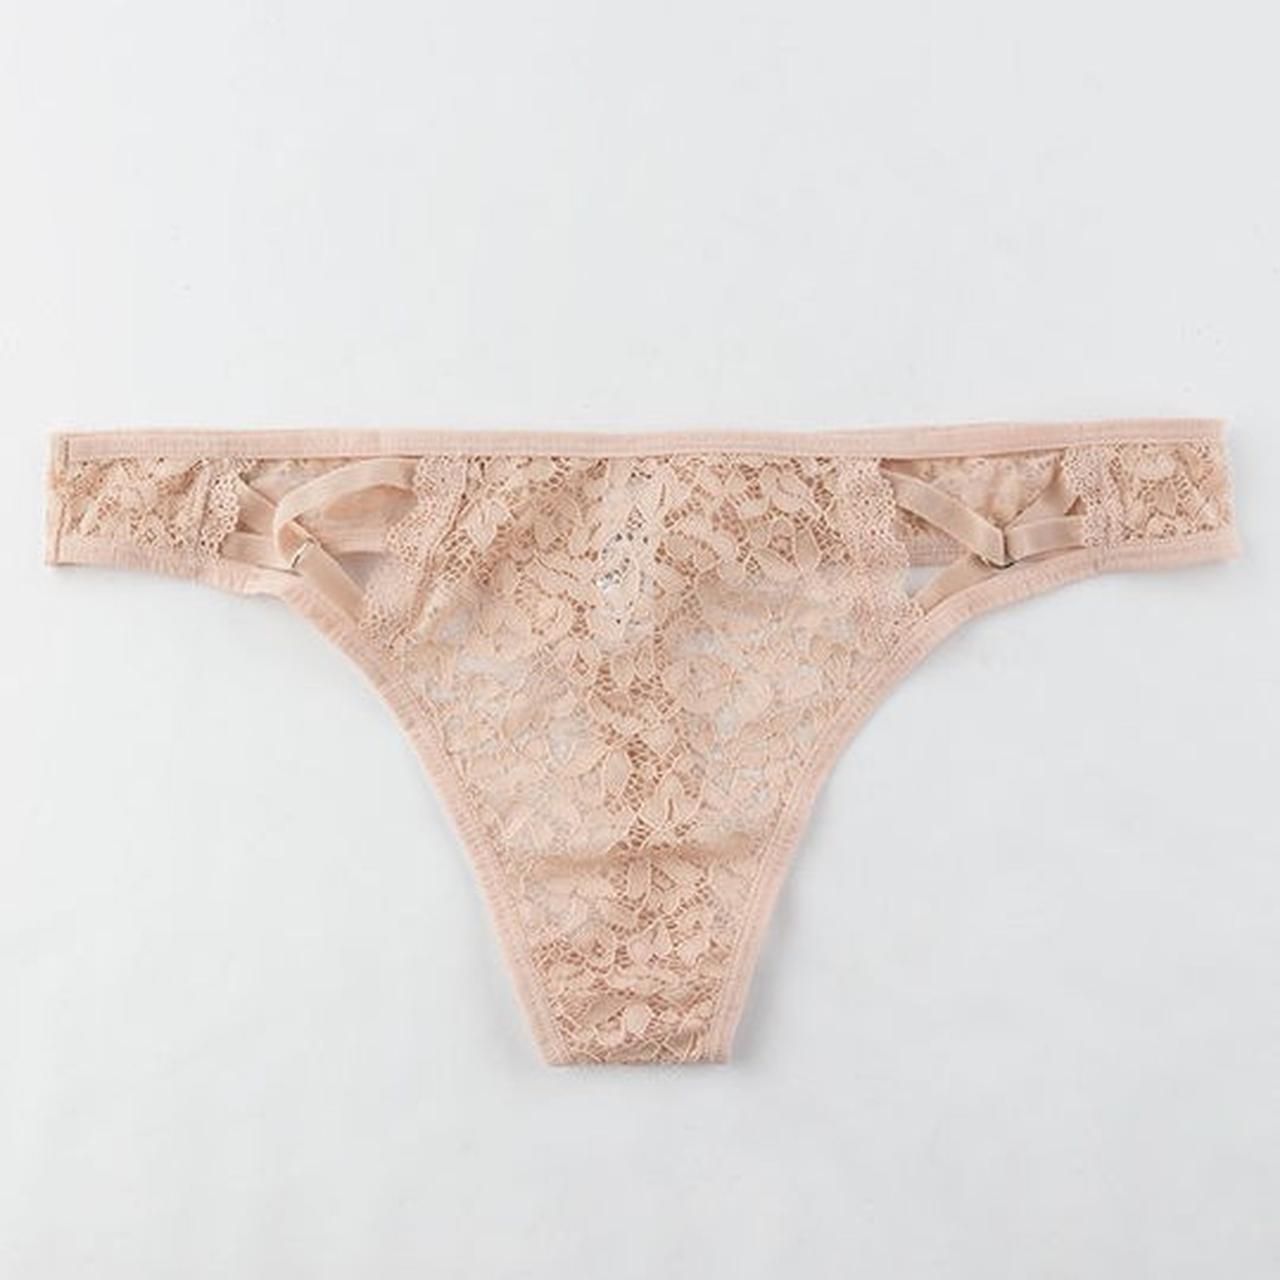 ISO peach forever 21 lace thong ❌ tanga underwear - Depop